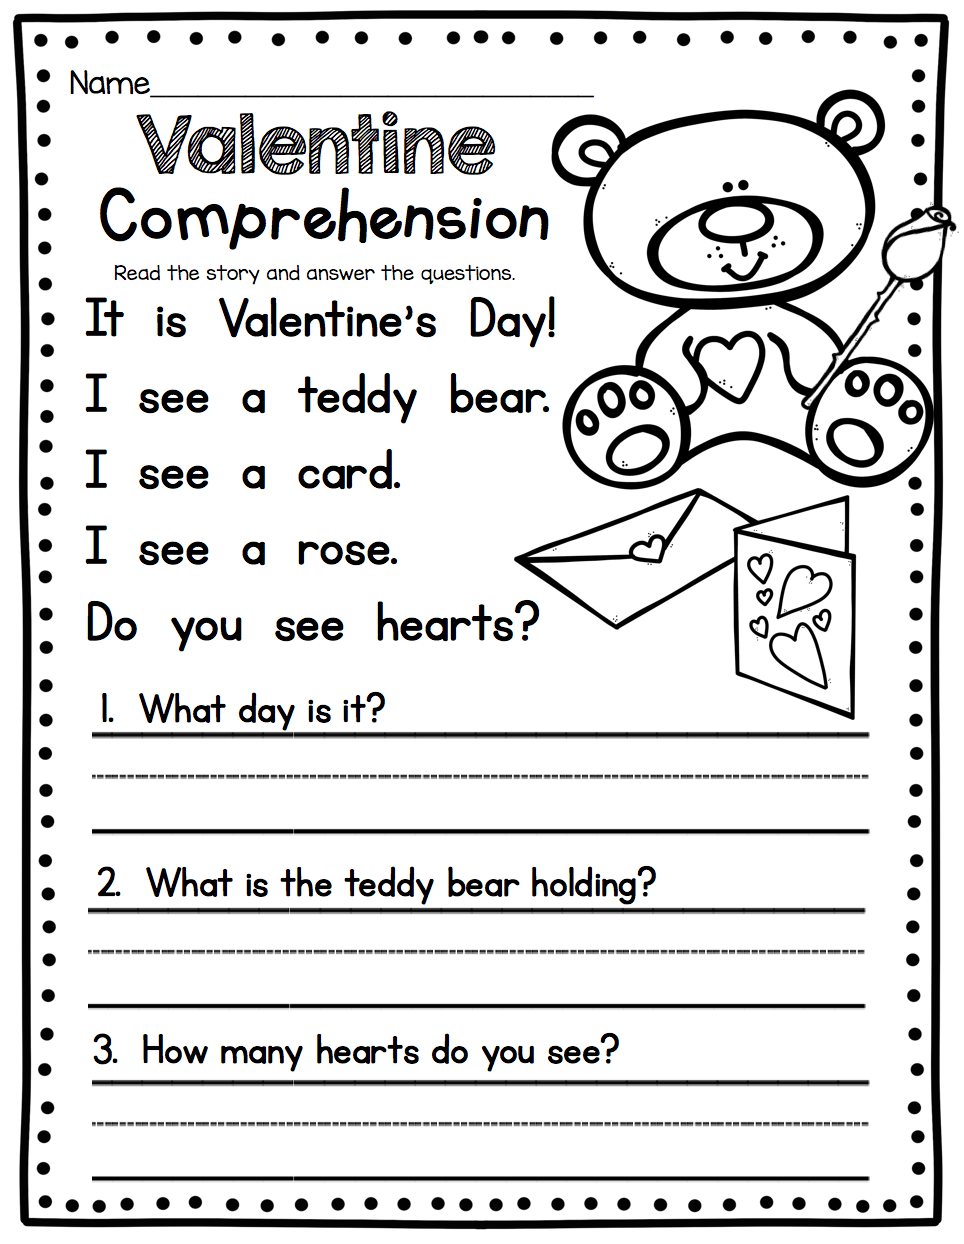 english-worksheets-for-1st-graders